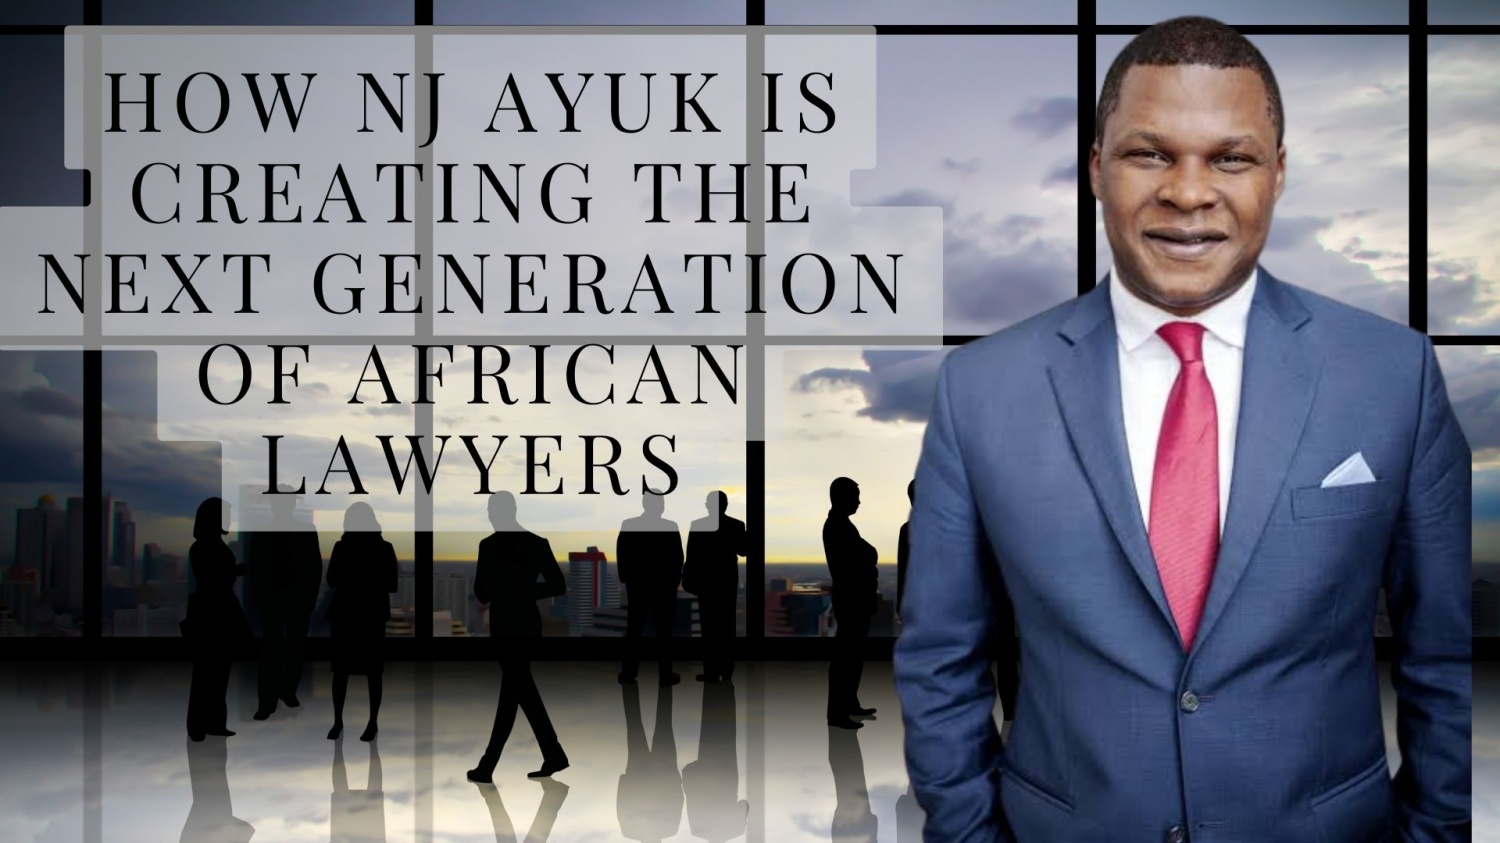 How NJ Ayuk Is Creating the Next Generation of African Lawyers